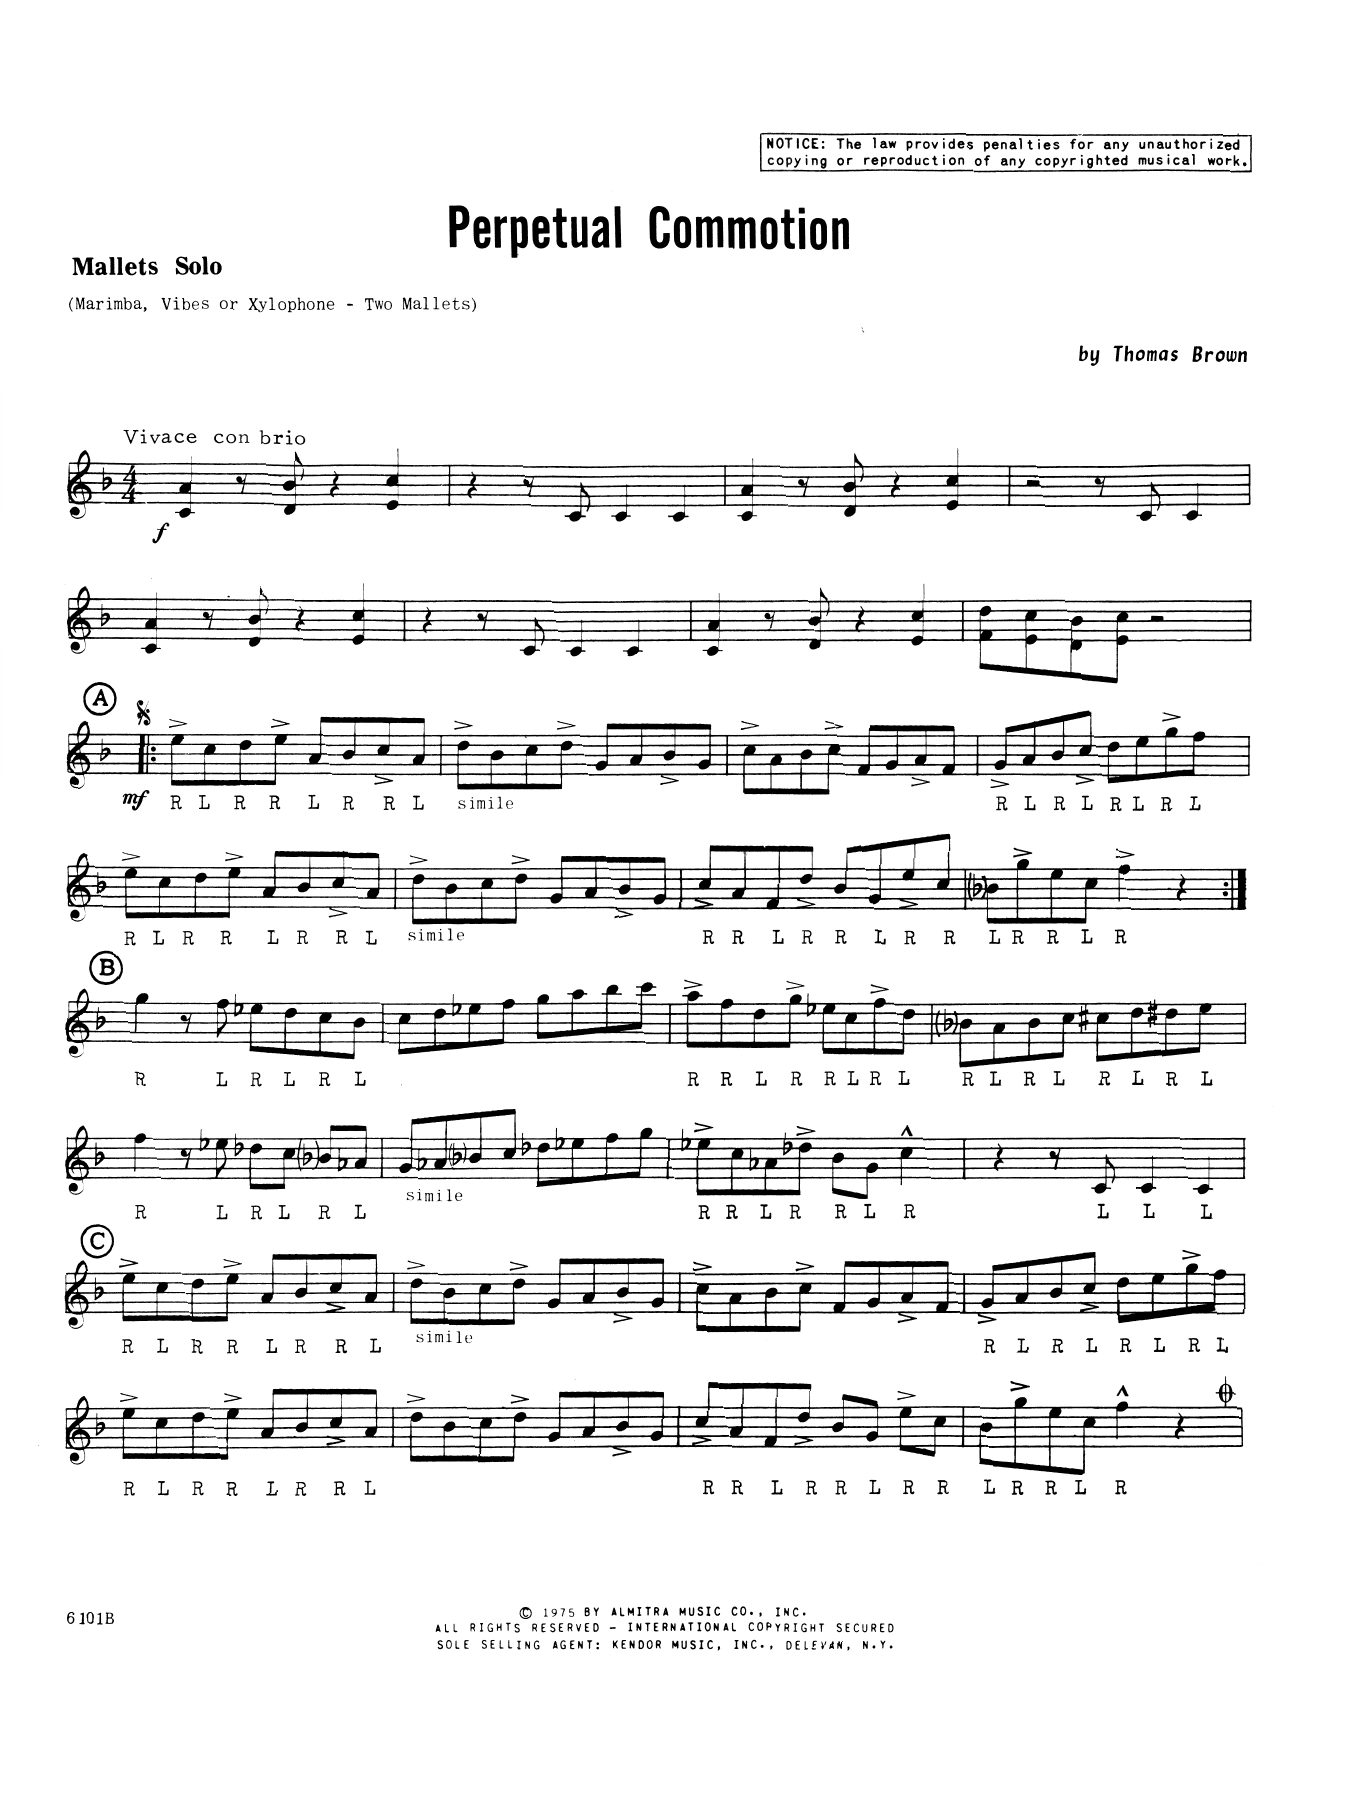 Download Tom Brown Perpetual Commotion - Mallets Sheet Music